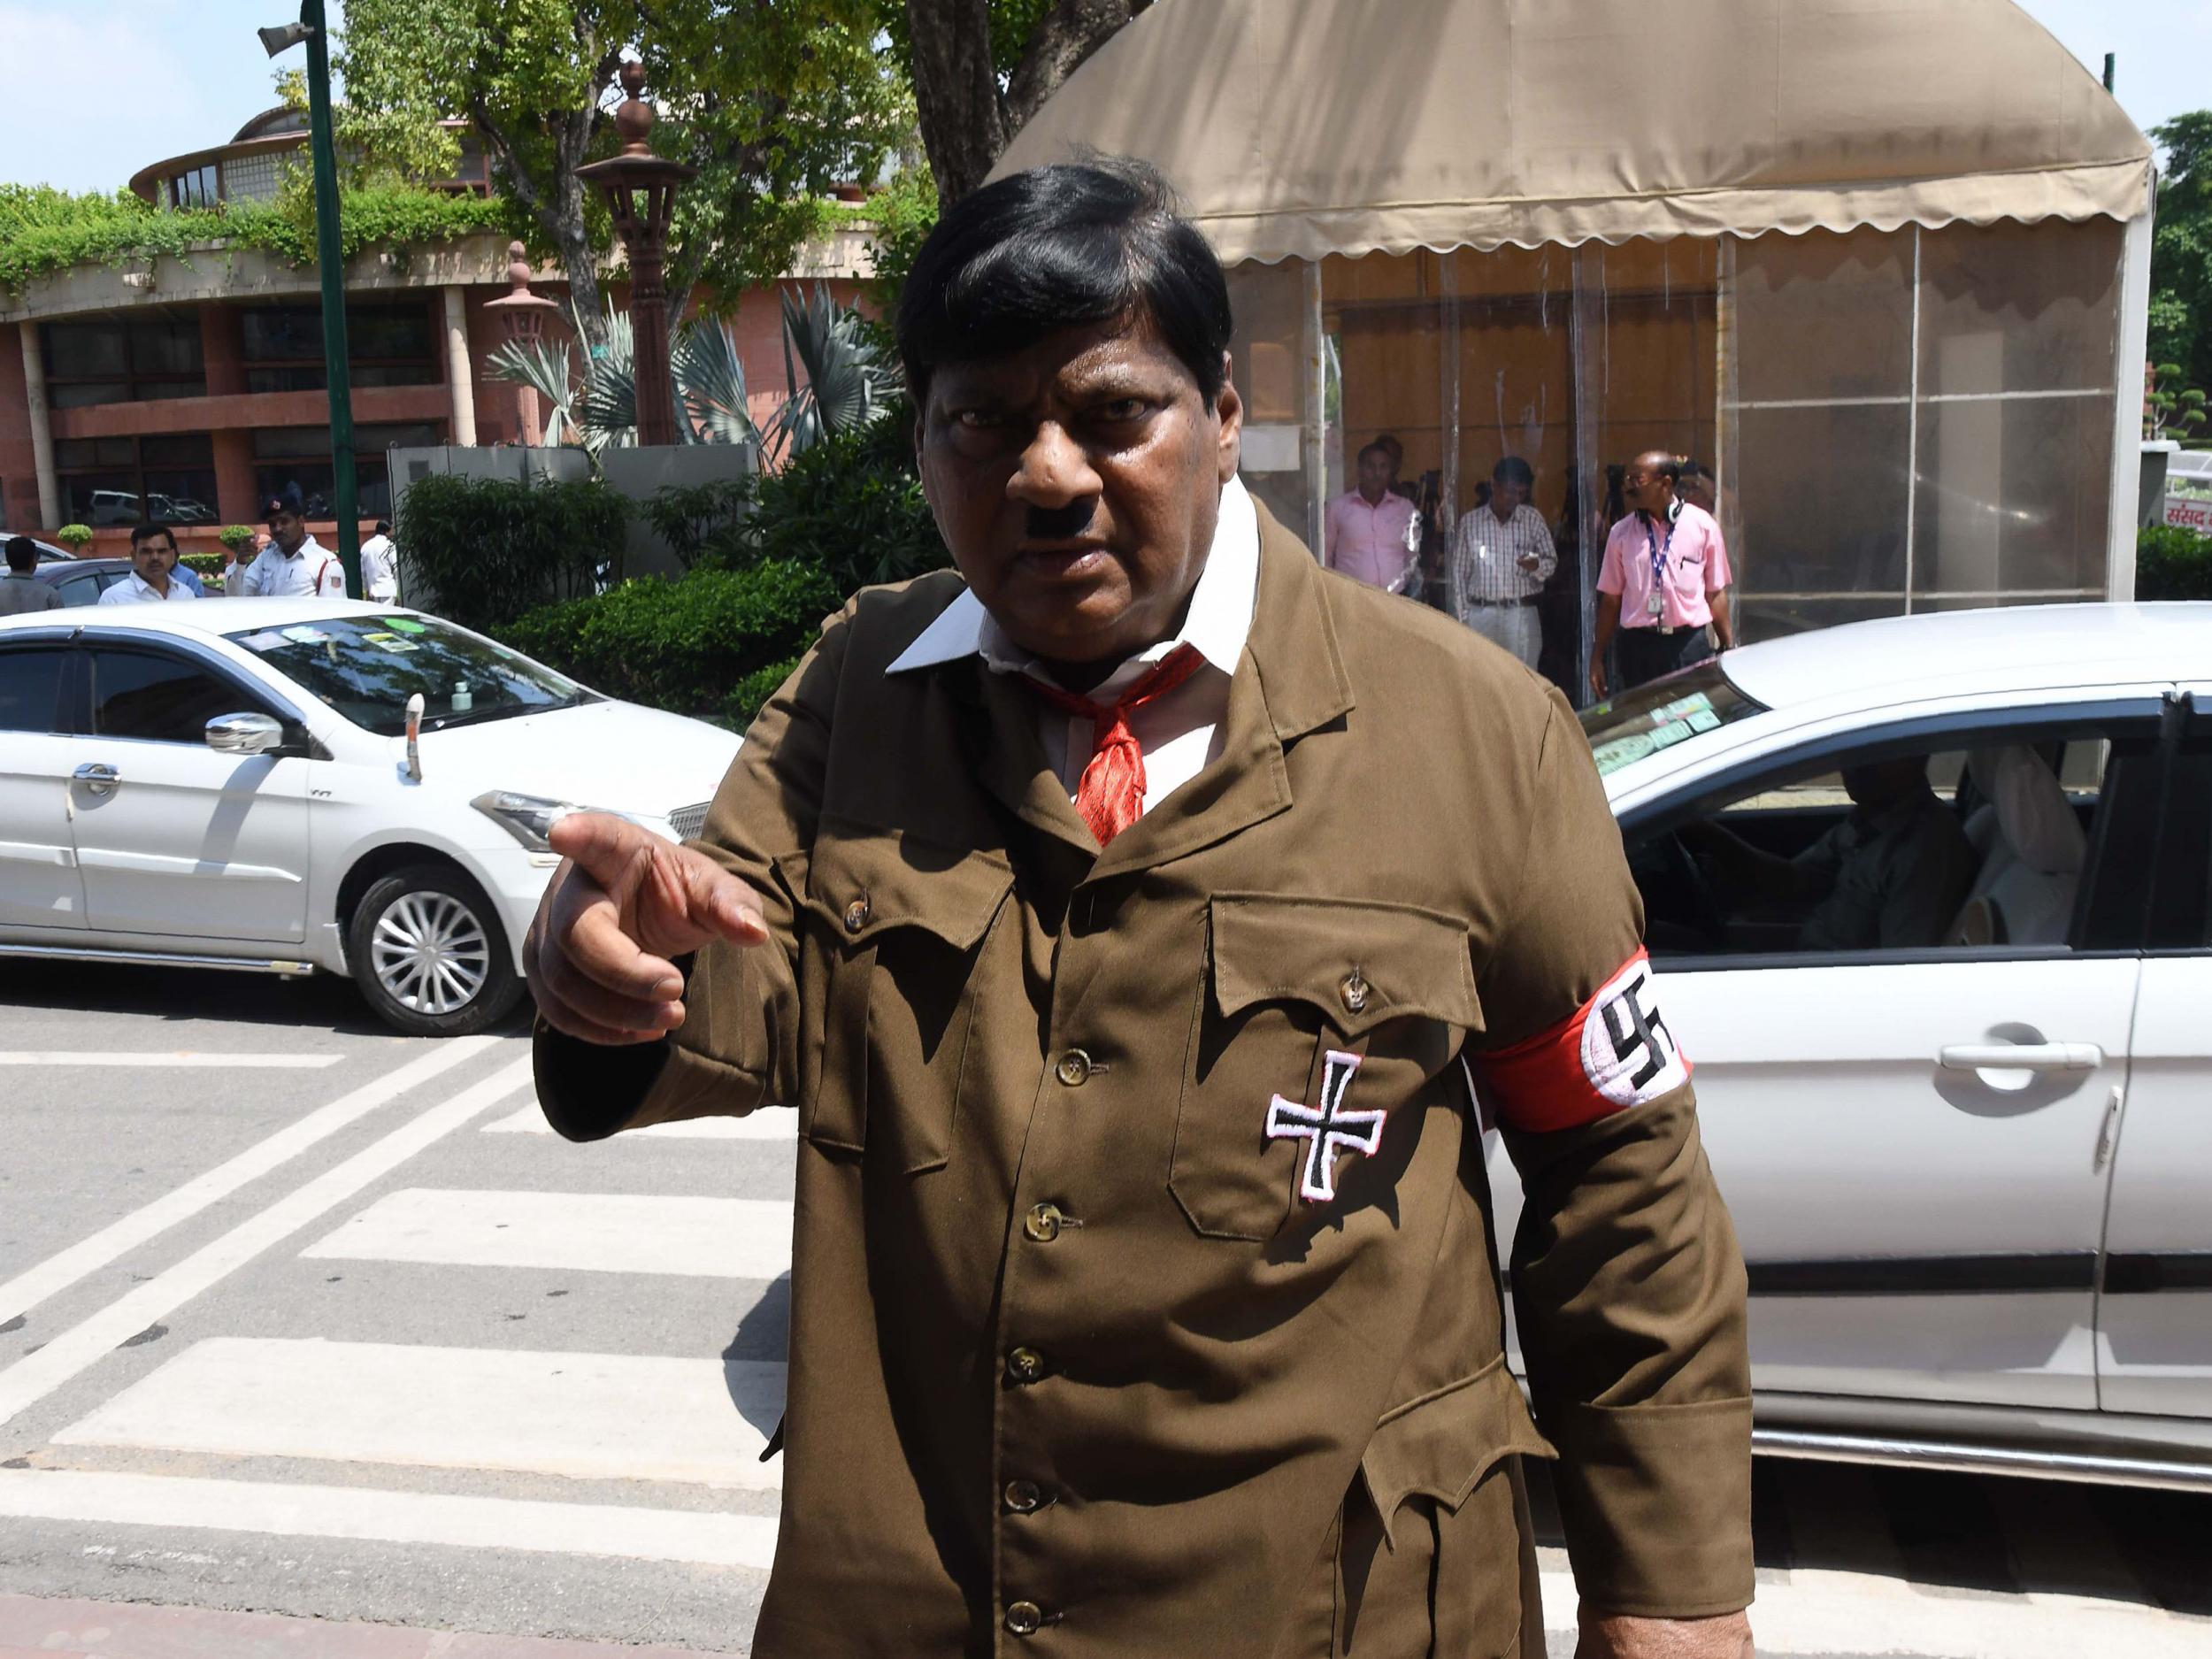 Indian film actor turned politician Naramalli Sivaprasad, arrives at parliament dressed as Adolf Hitler to press for government funding for his home state of Andhra Pradesh, in New Delhi